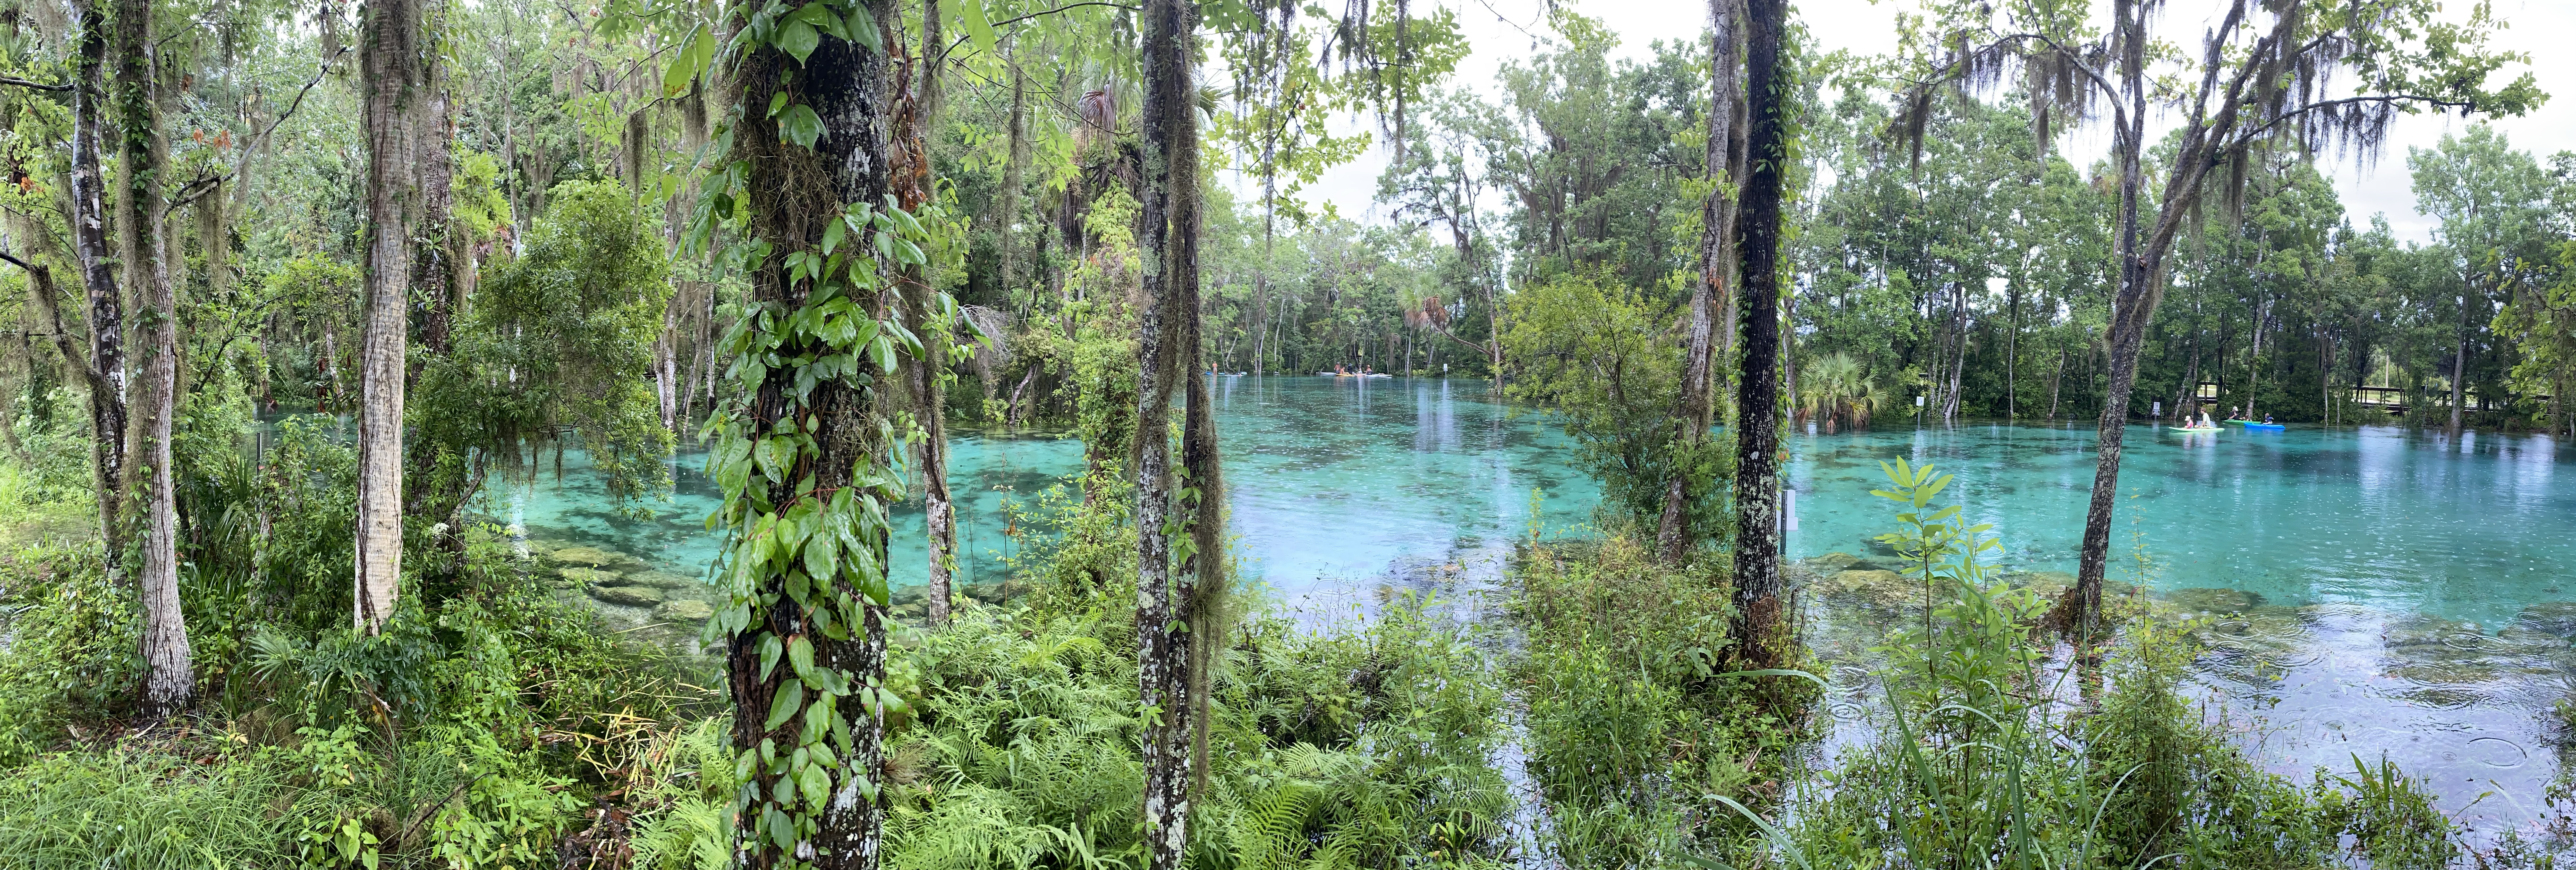 panorama view of Three Sisters Springs showing beautiful, blue, clear water